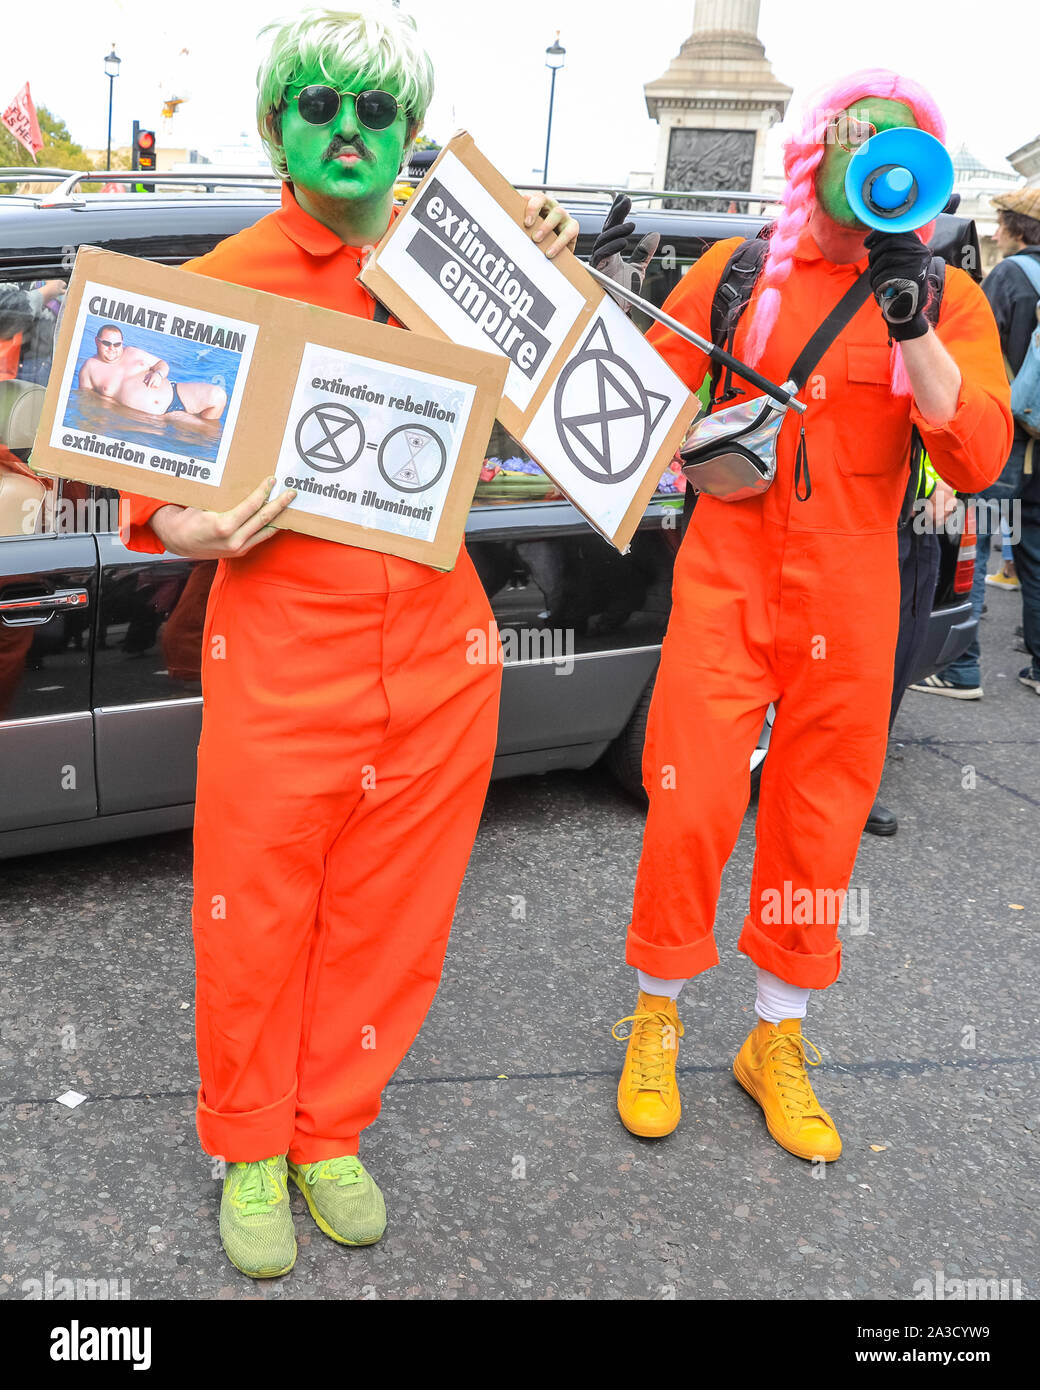 London, UK. 07th Oct, 2019. Climate activists from Extinction Rebellion have staged a number of protests at various sites in Westminster, including Bridges and several government ministries, to raise awareness on global climate emergency issues. Credit: Imageplotter/Alamy Live News Stock Photo